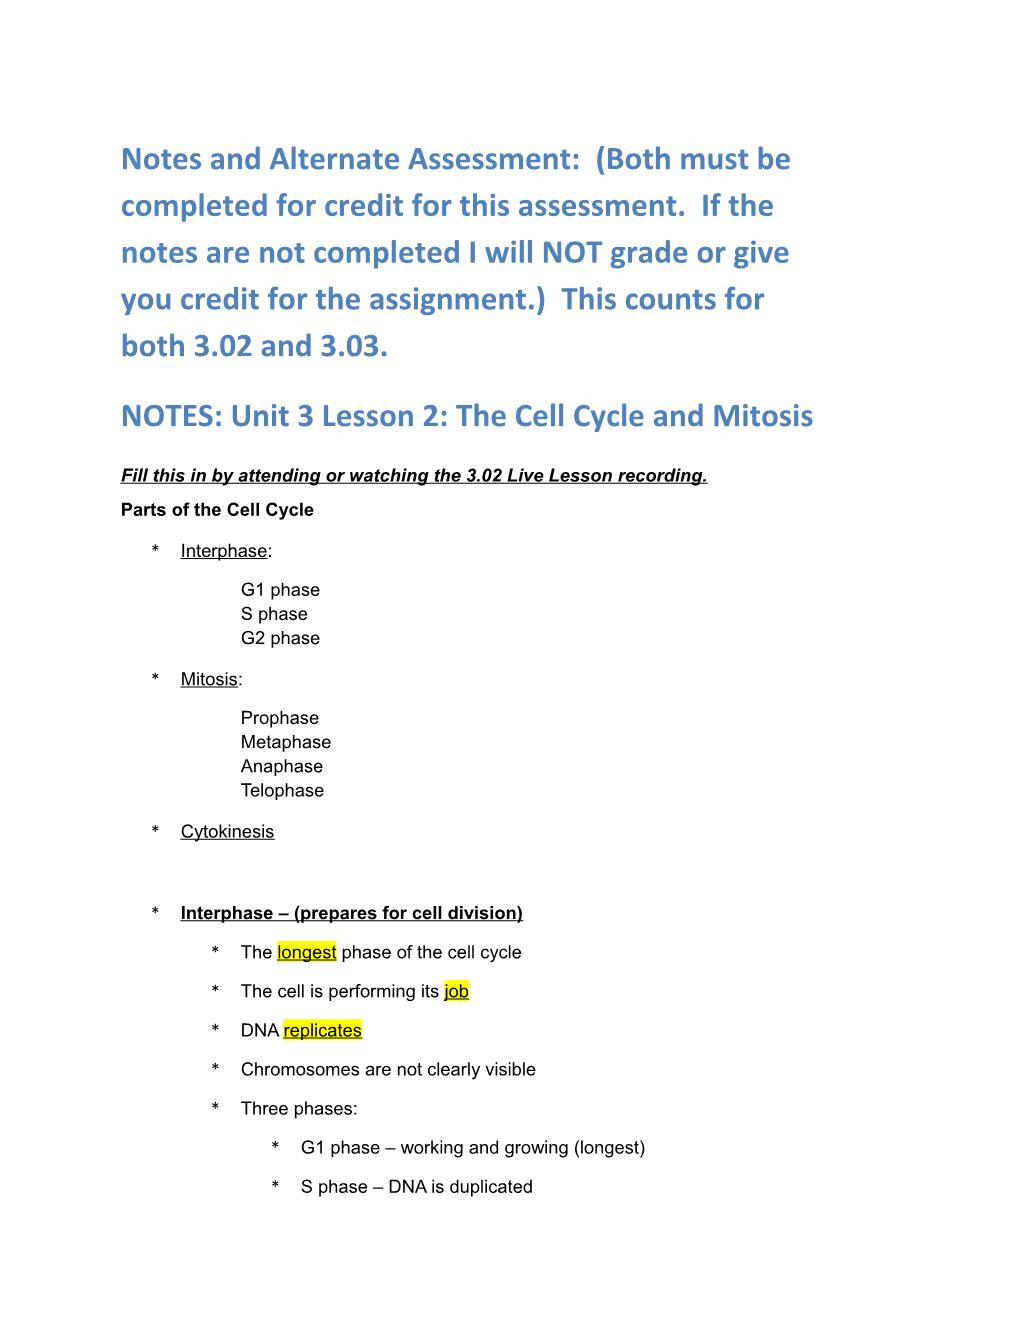 NOTES: Unit 3 Lesson 2: the Cell Cycle and Mitosis